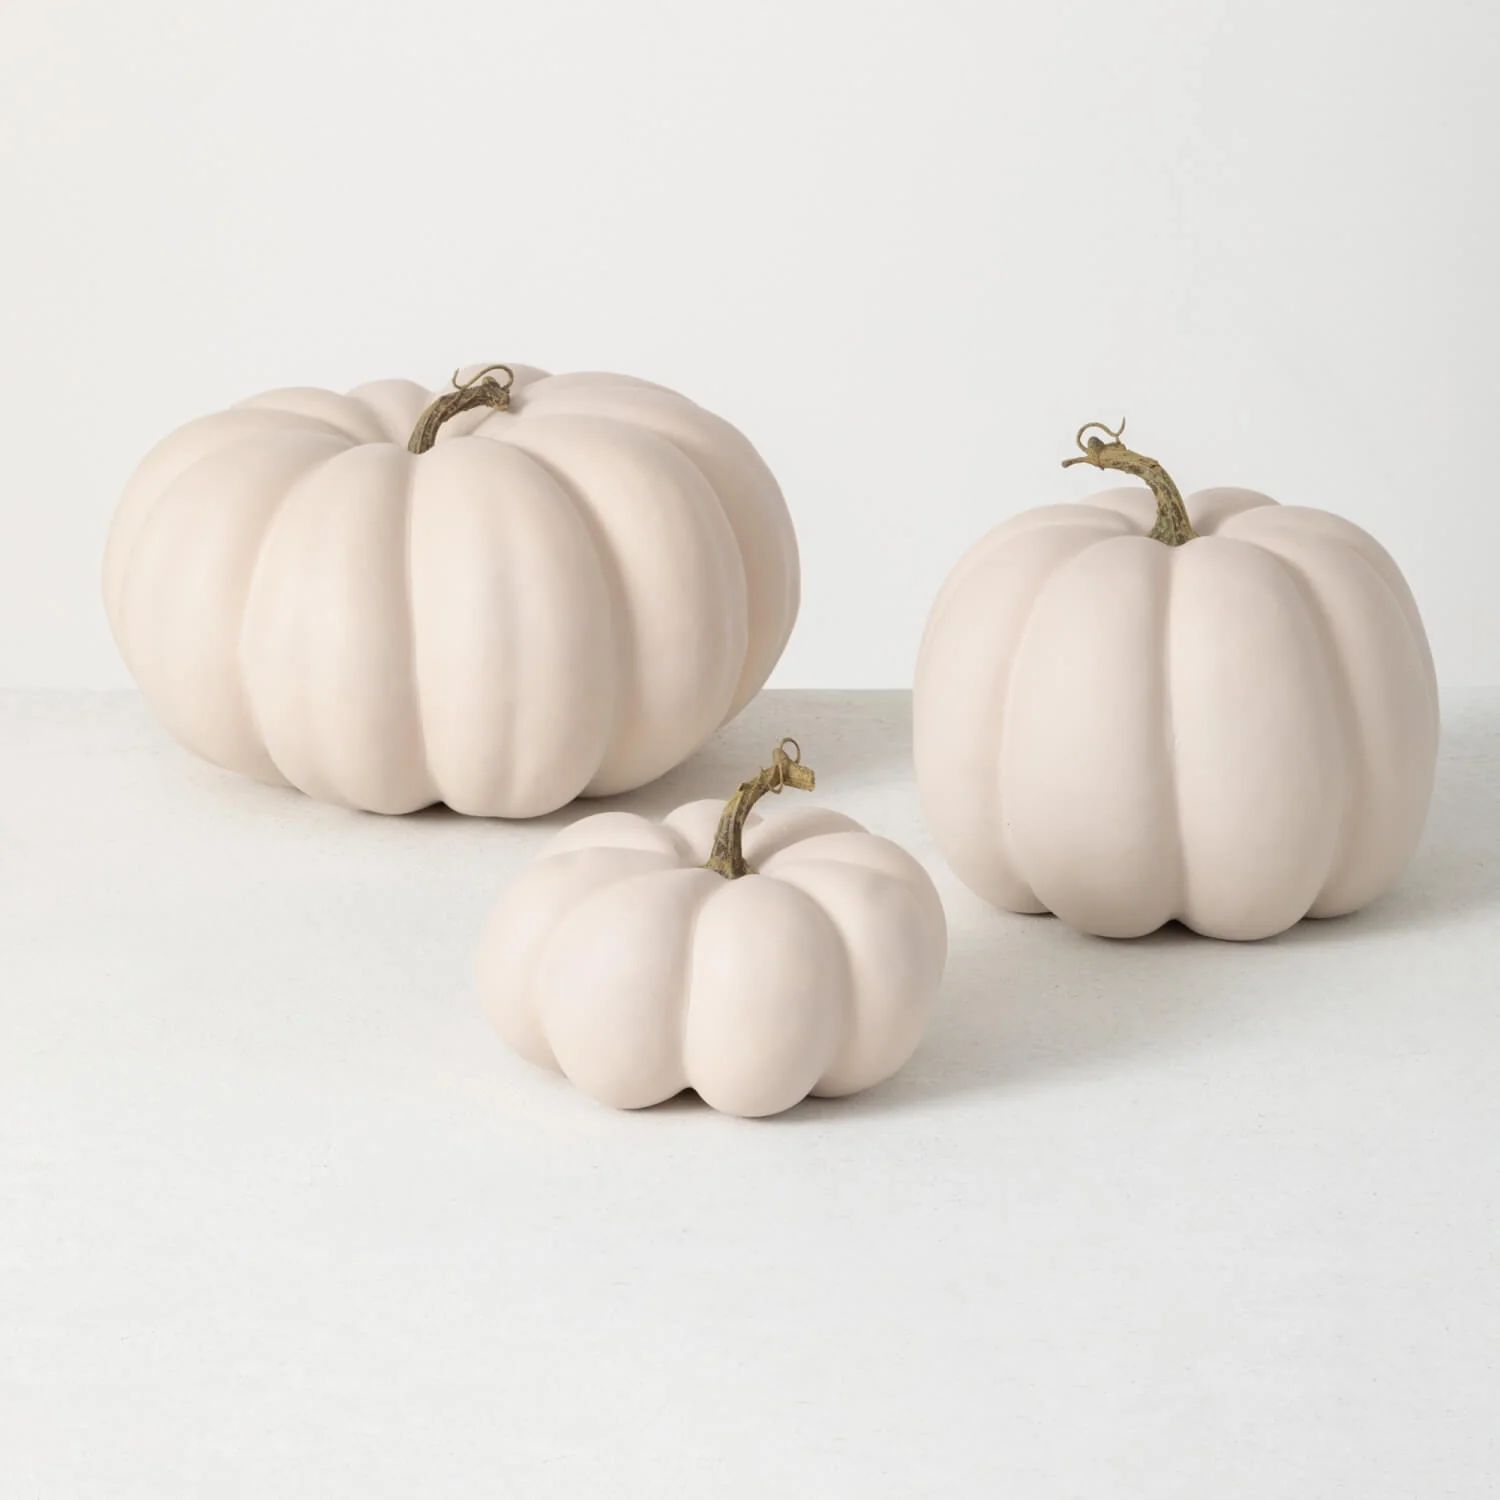 Off-White Pumpkin, 3 Style Options | The Nested Fig